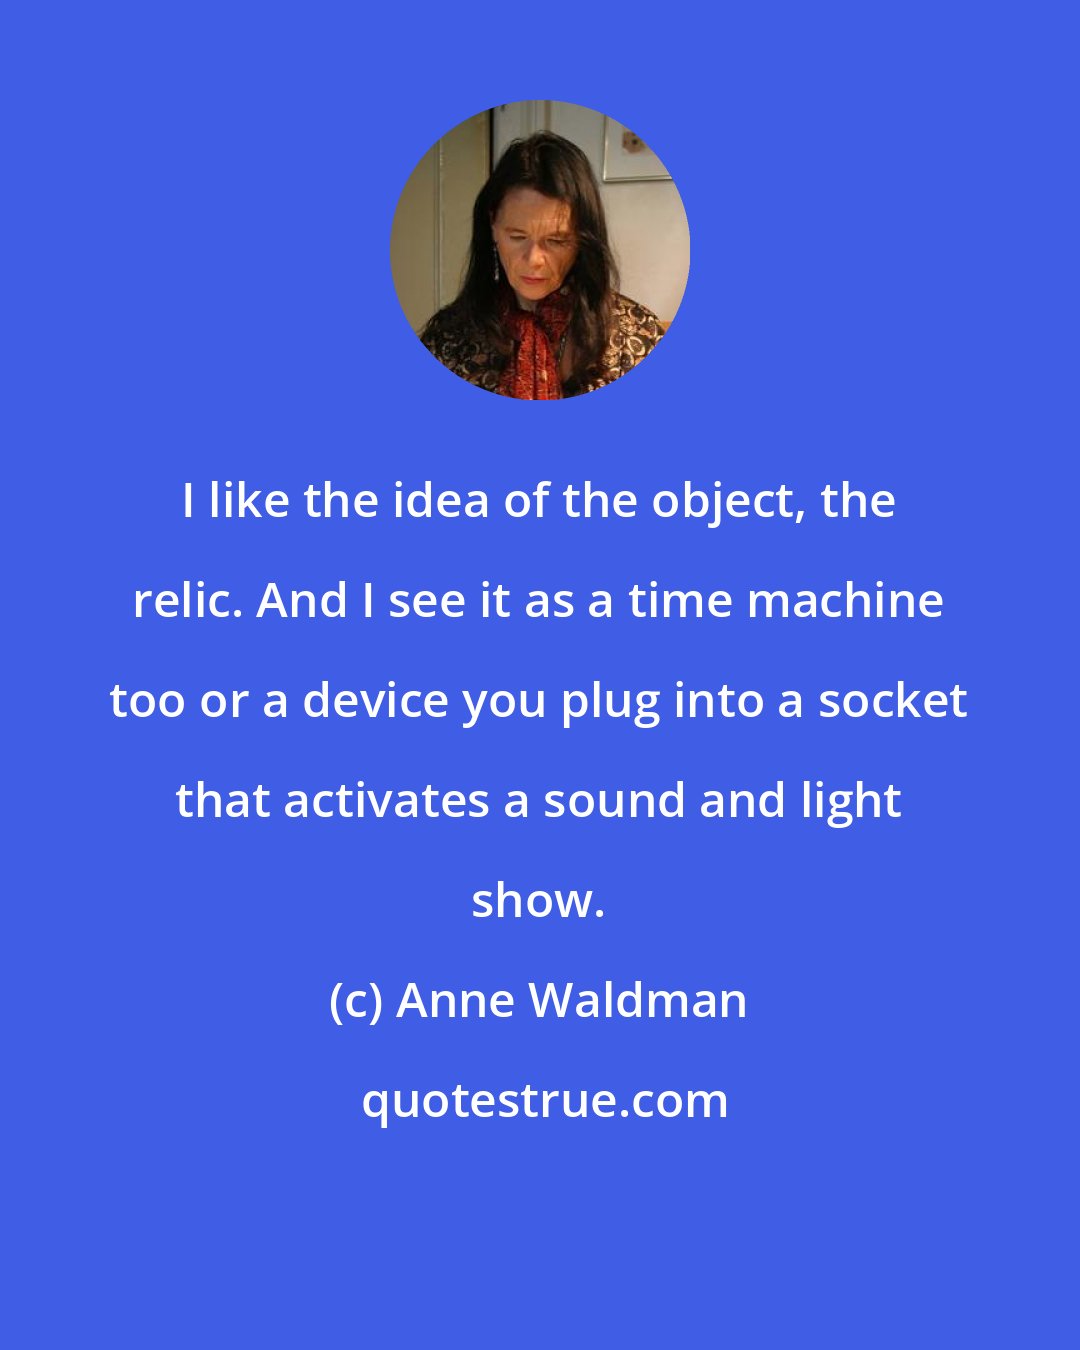 Anne Waldman: I like the idea of the object, the relic. And I see it as a time machine too or a device you plug into a socket that activates a sound and light show.